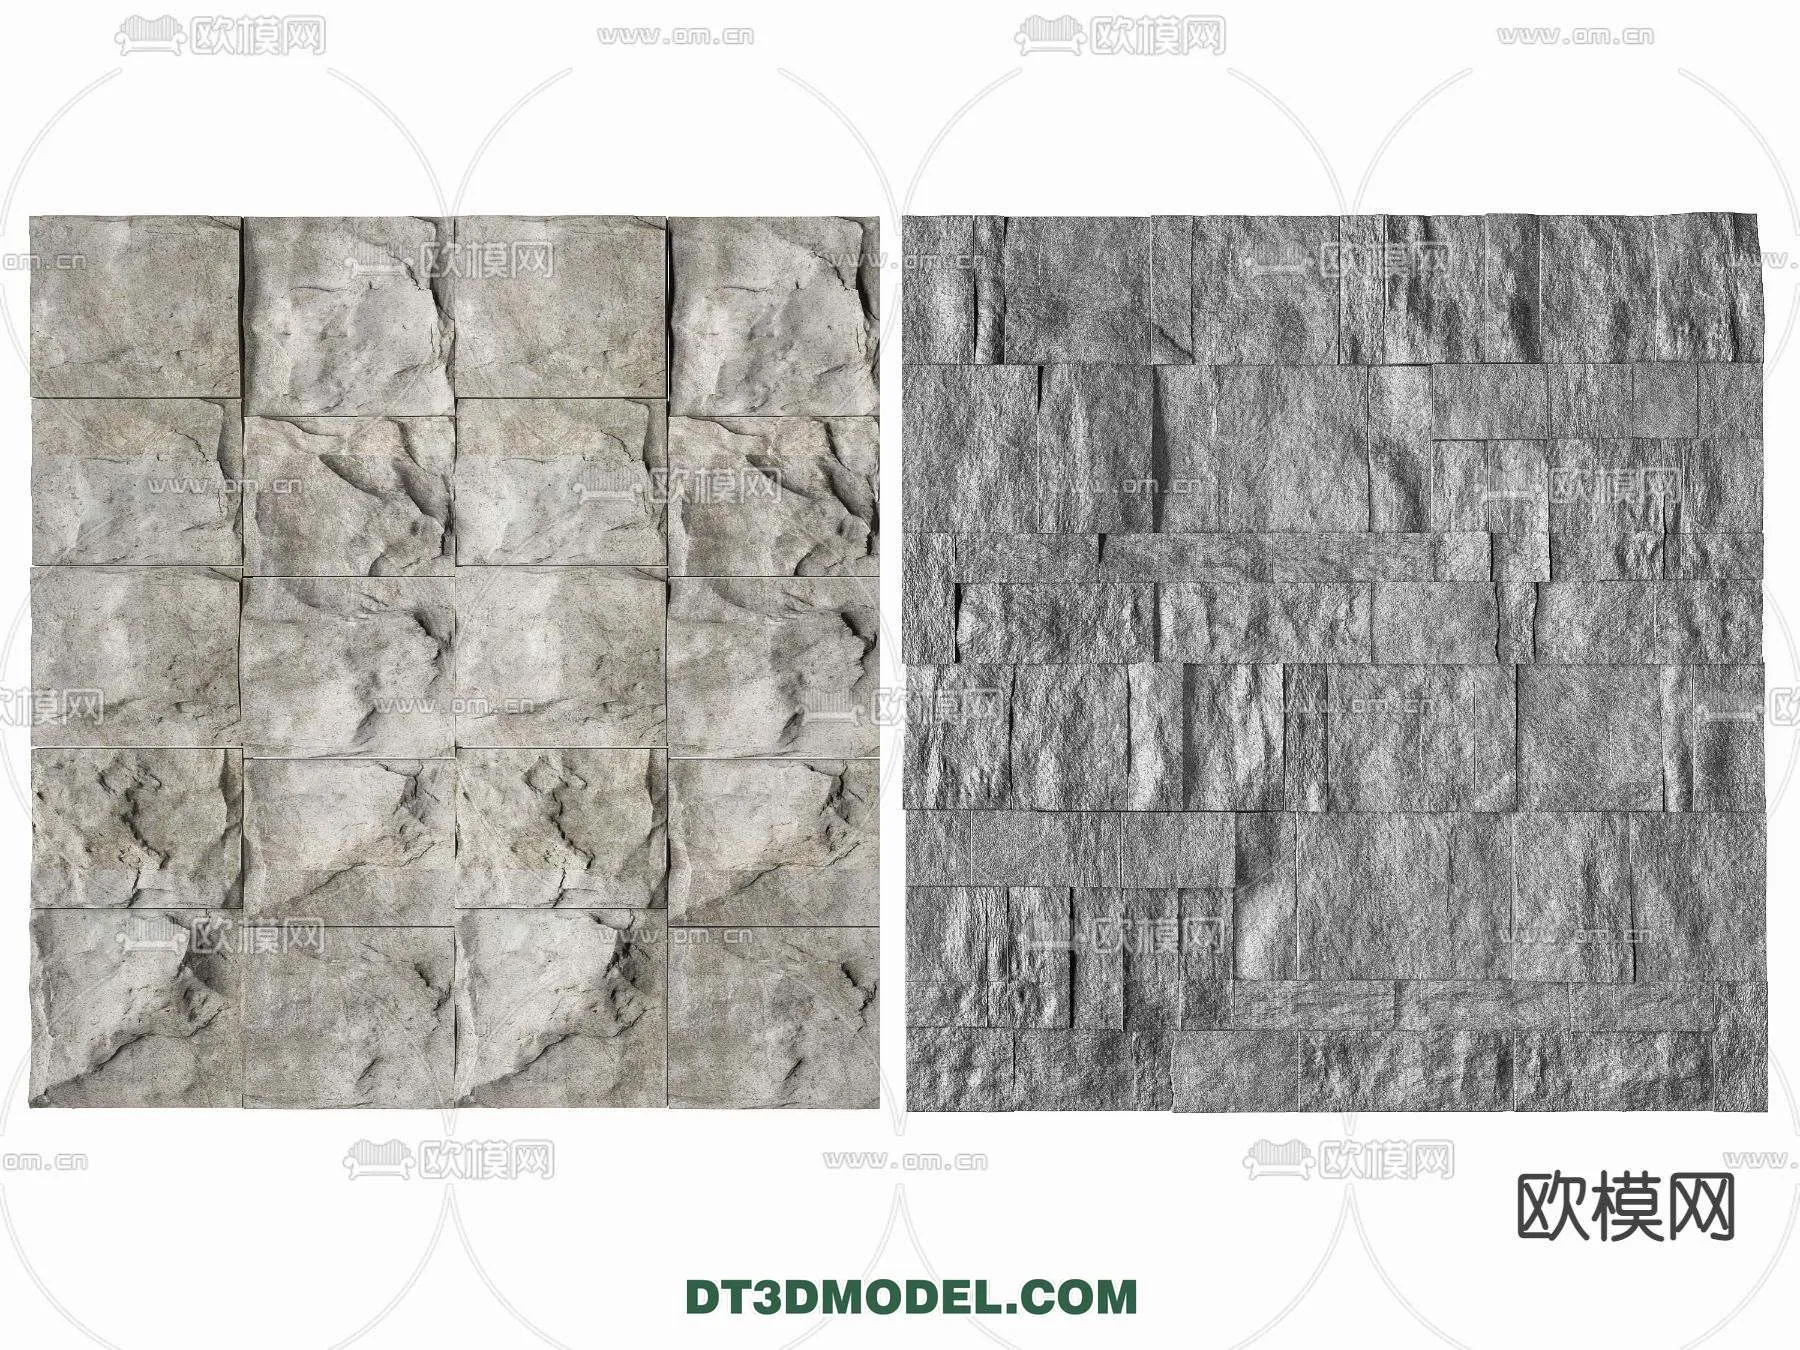 MATERIAL – TEXTURES – ROCK WALL – 0008